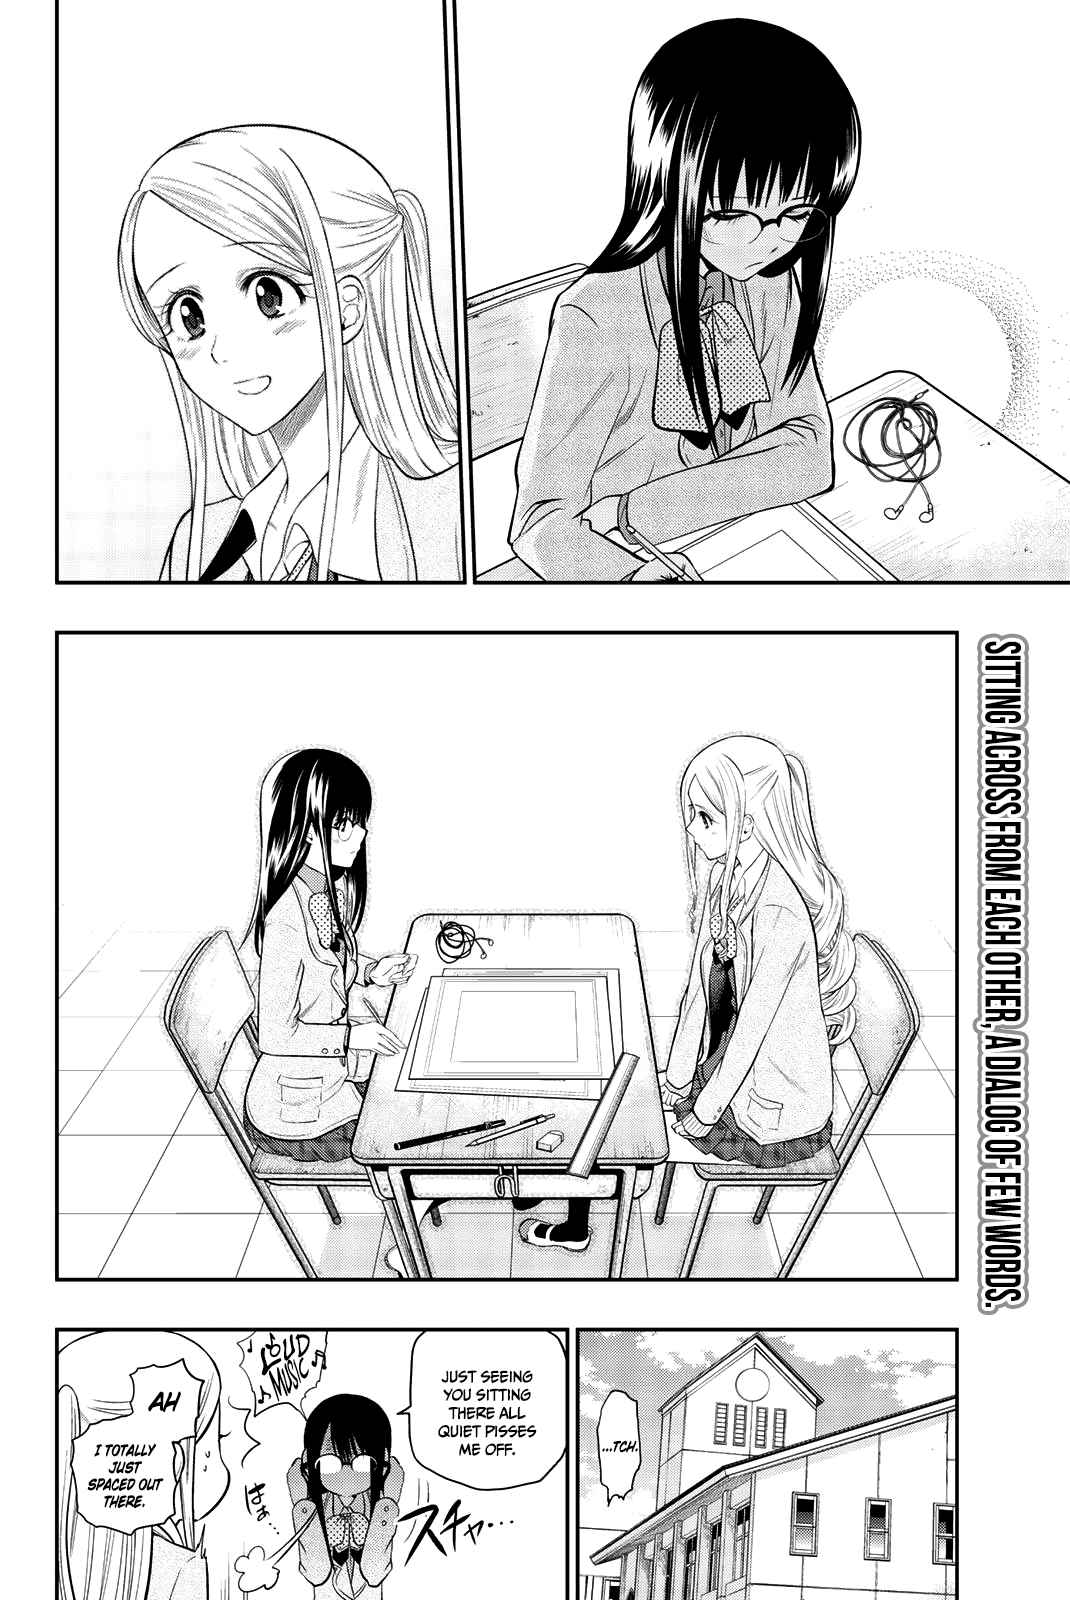 Hoshino, Me wo Tsubutte Vol. 9 Ch. 73 Dreaming With Her